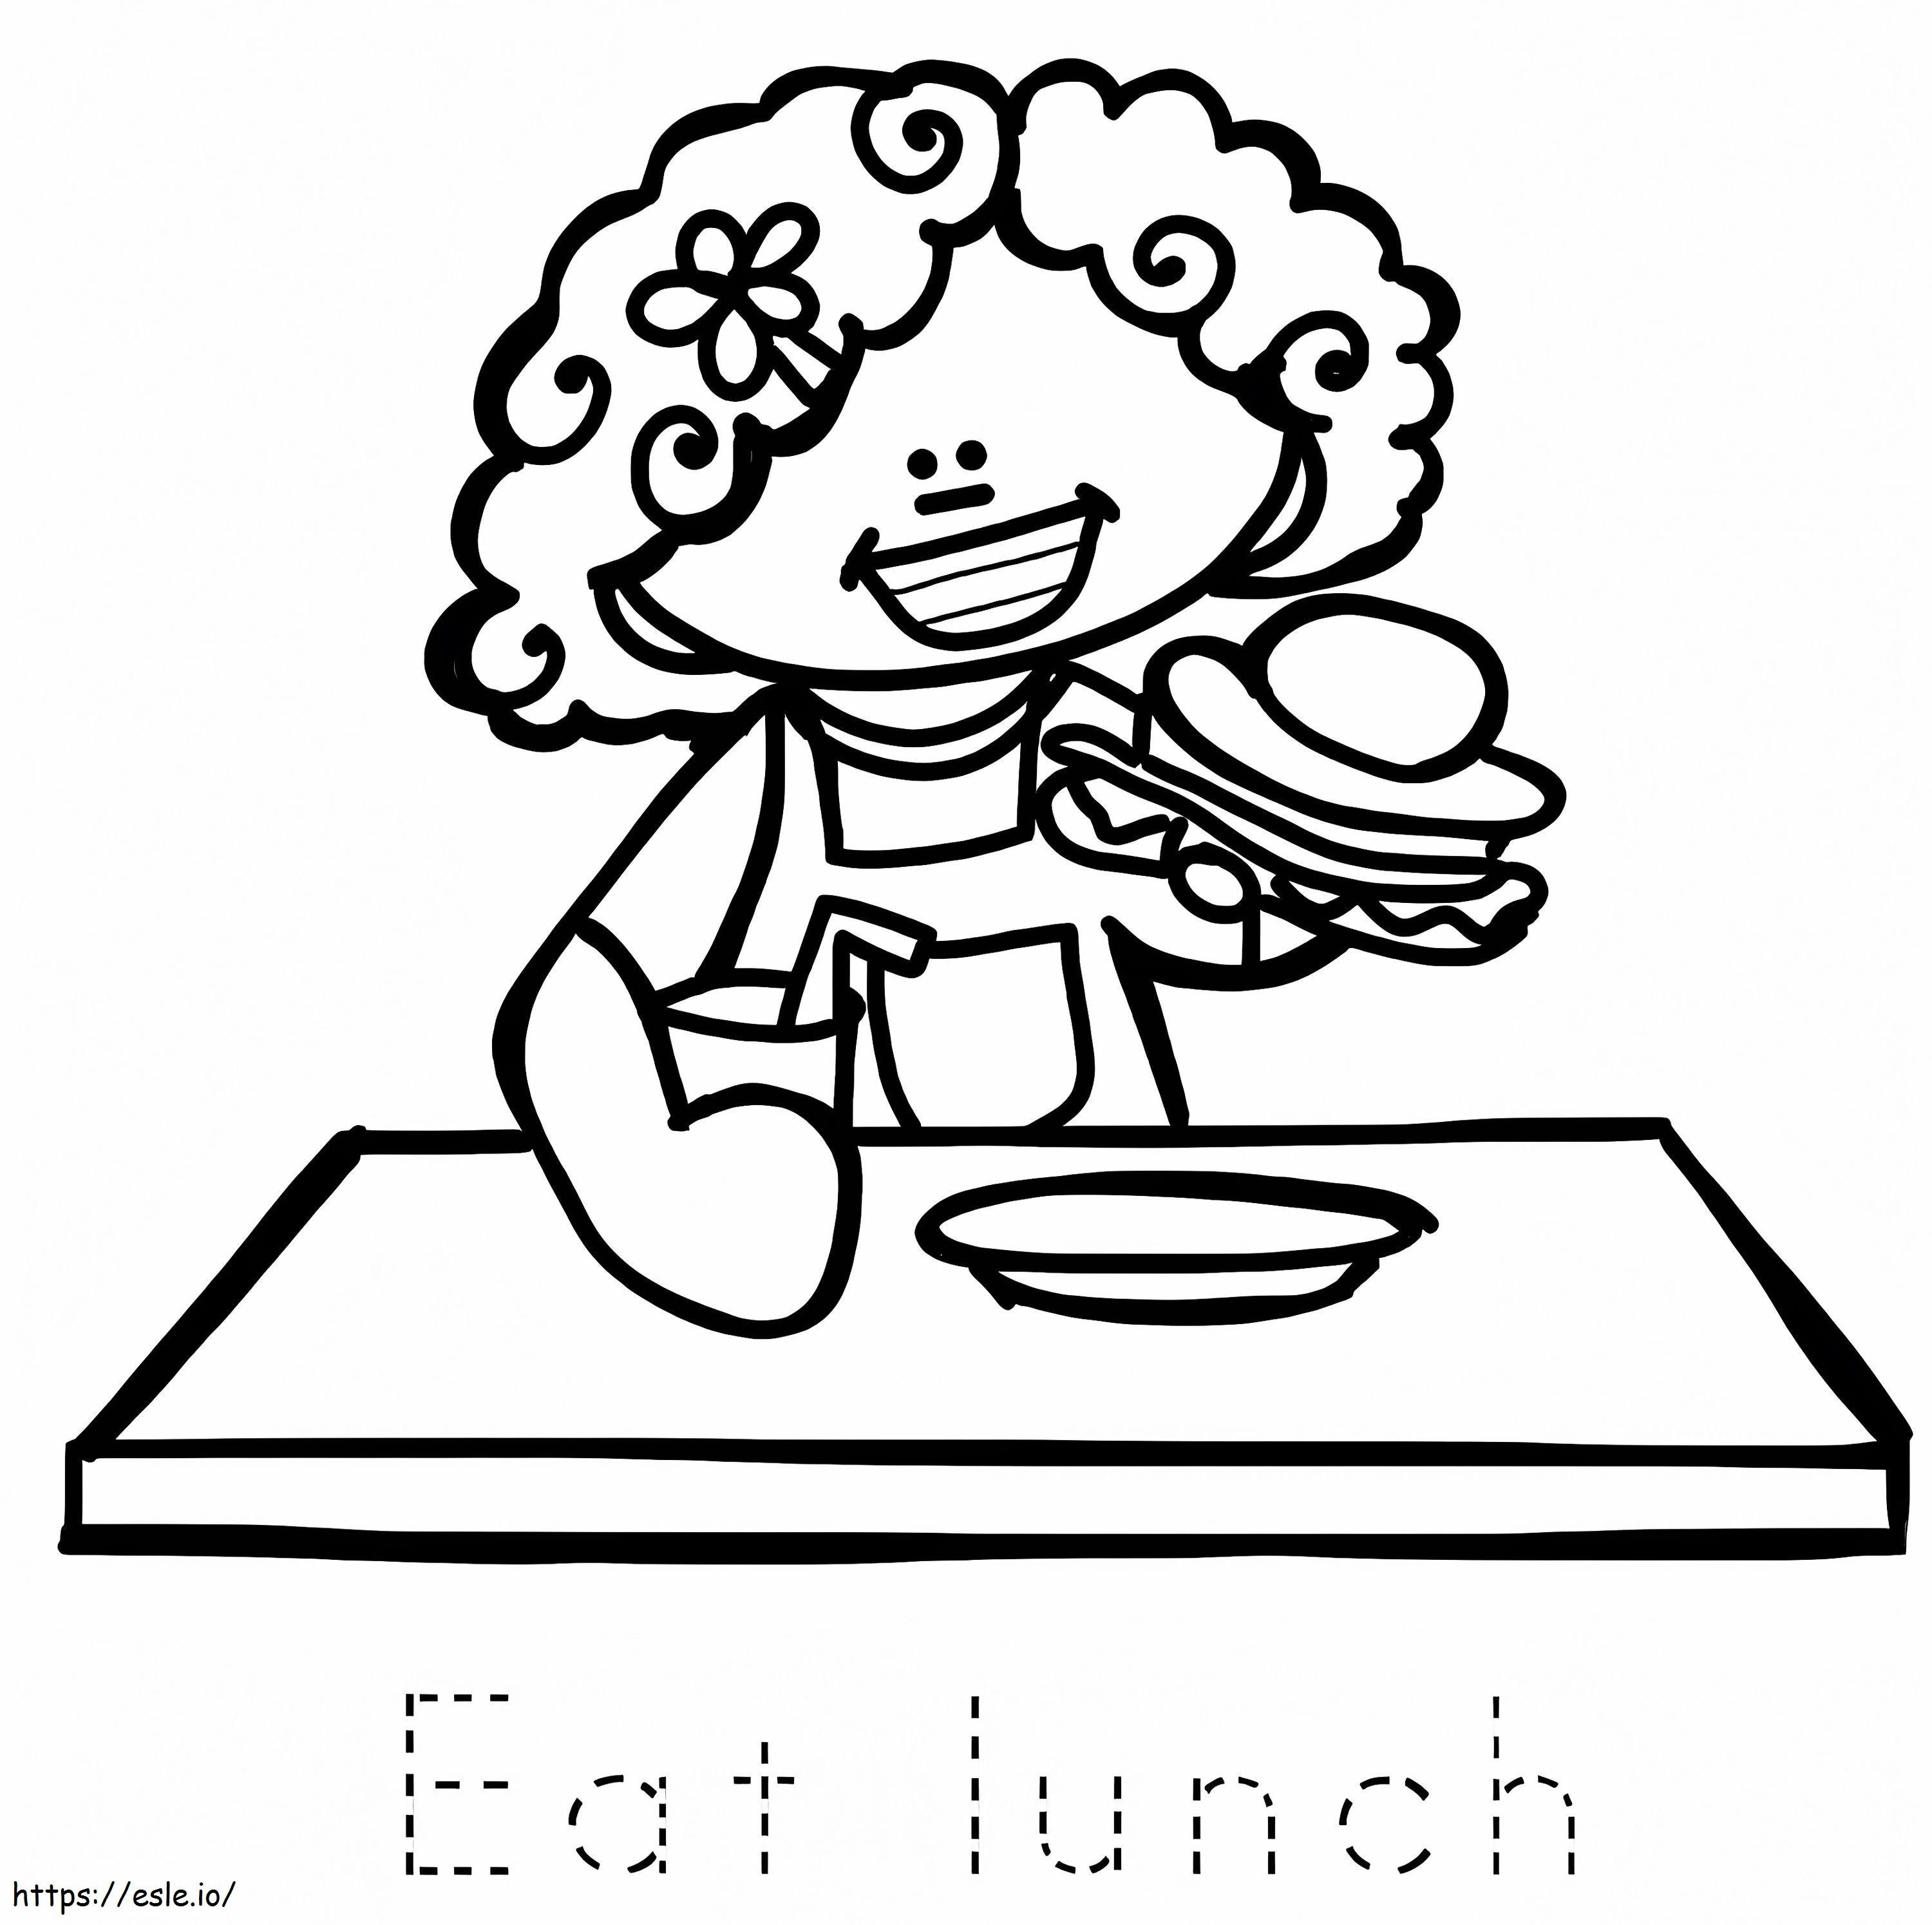 Eat Lunch coloring page